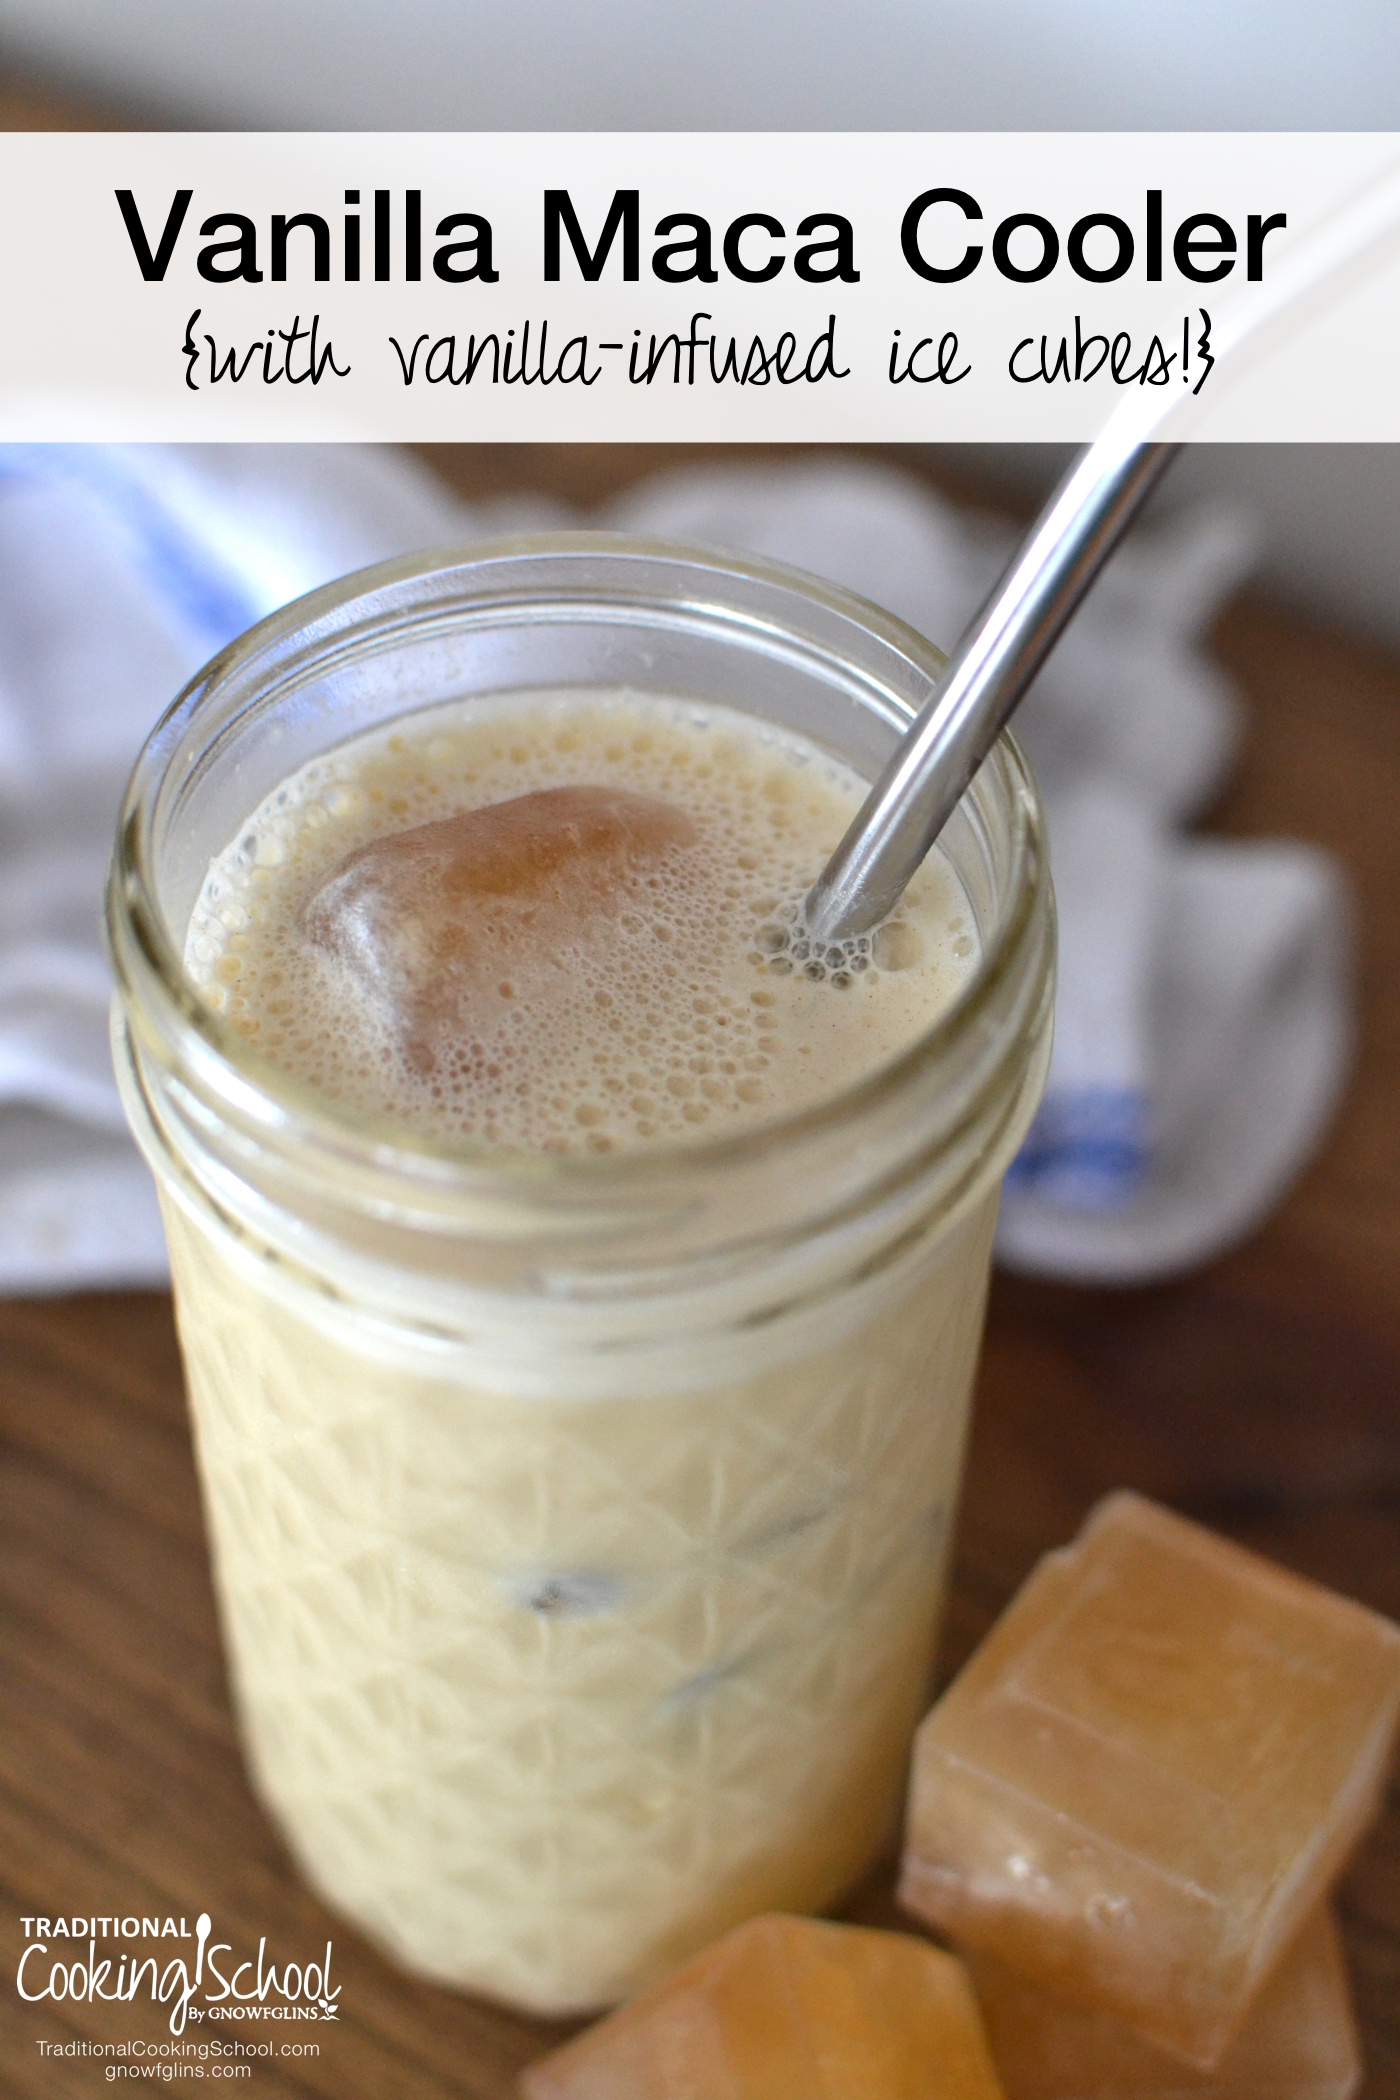 Vanilla Maca Cooler {with vanilla-infused ice cubes!} | Sometimes I just want to sip on something cool and refreshing. The sunny afternoons around here call for something energizing -- a Vanilla Maca Cooler. With vanilla, a bit of cinnamon and nutmeg, a raw egg yolk for sustained energy, and some raw milk, this is the perfect recipe for running errands, reading a book, or kicking back on your front porch. | TraditionalCookingSchool.com